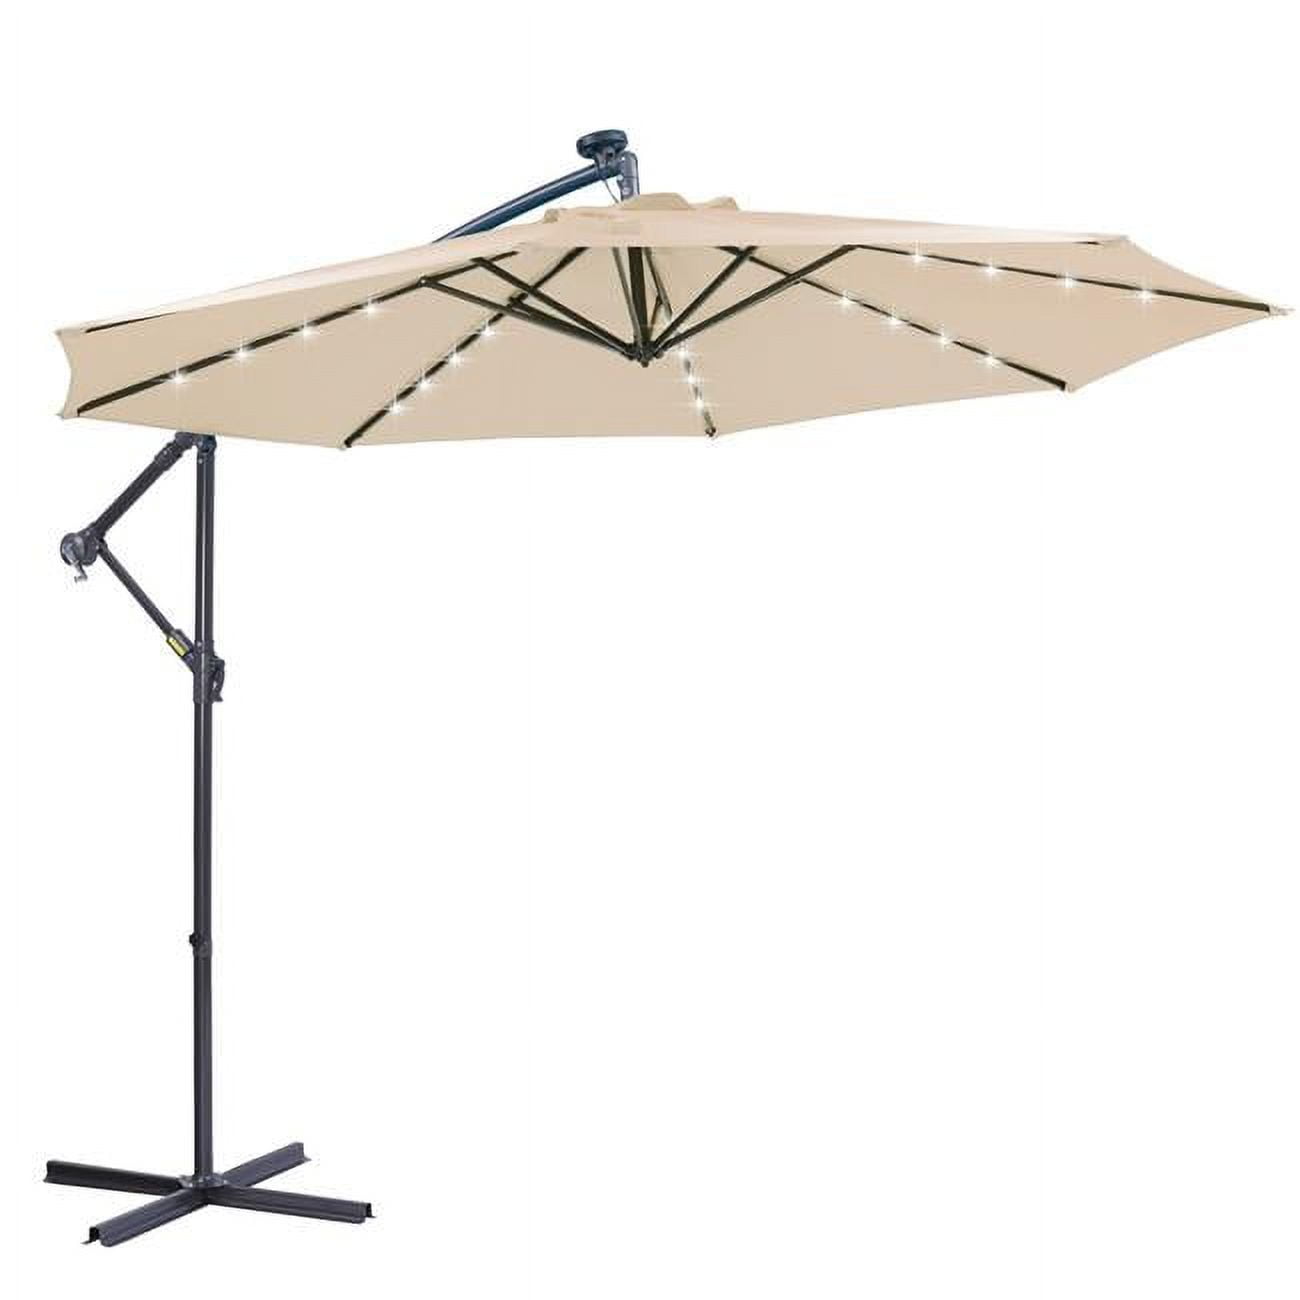 UBS-W41917533 10 ft. Solar LED Patio Outdoor Hanging Cantilever Offset Umbrella with 32 LED Lights, Tan -  Direct Wicker